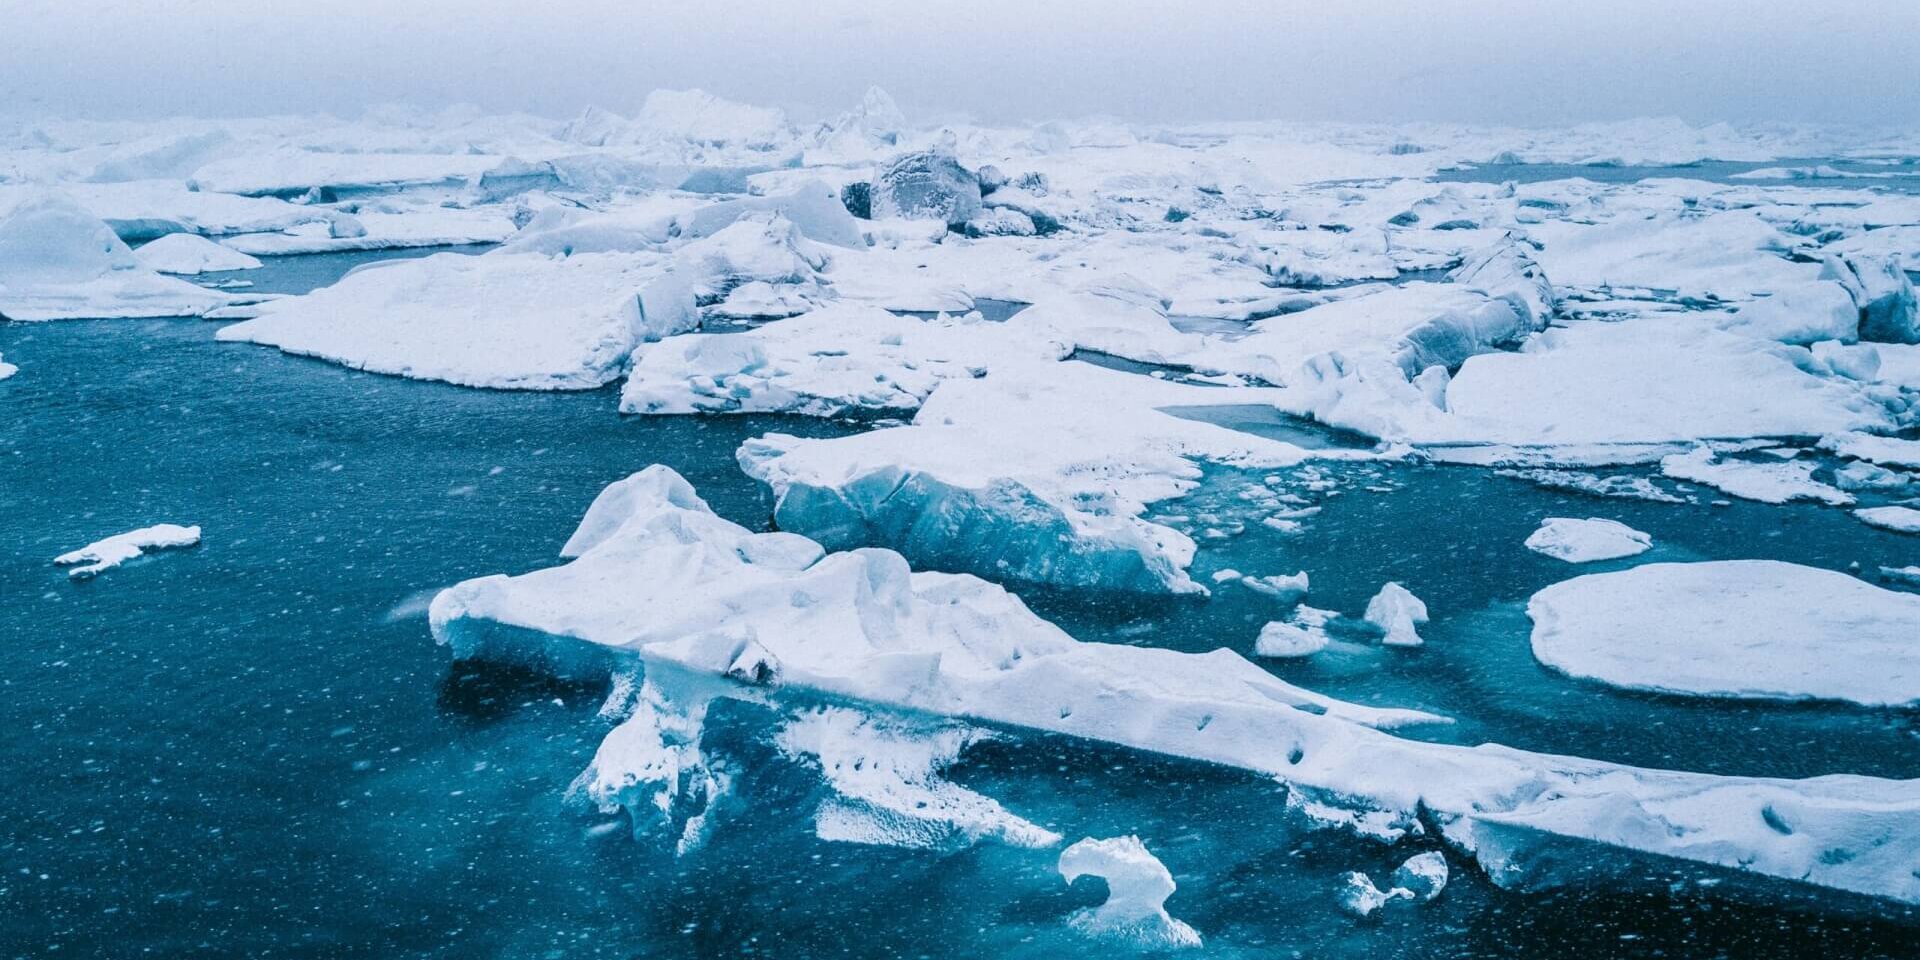 A view of icebergs in the ocean